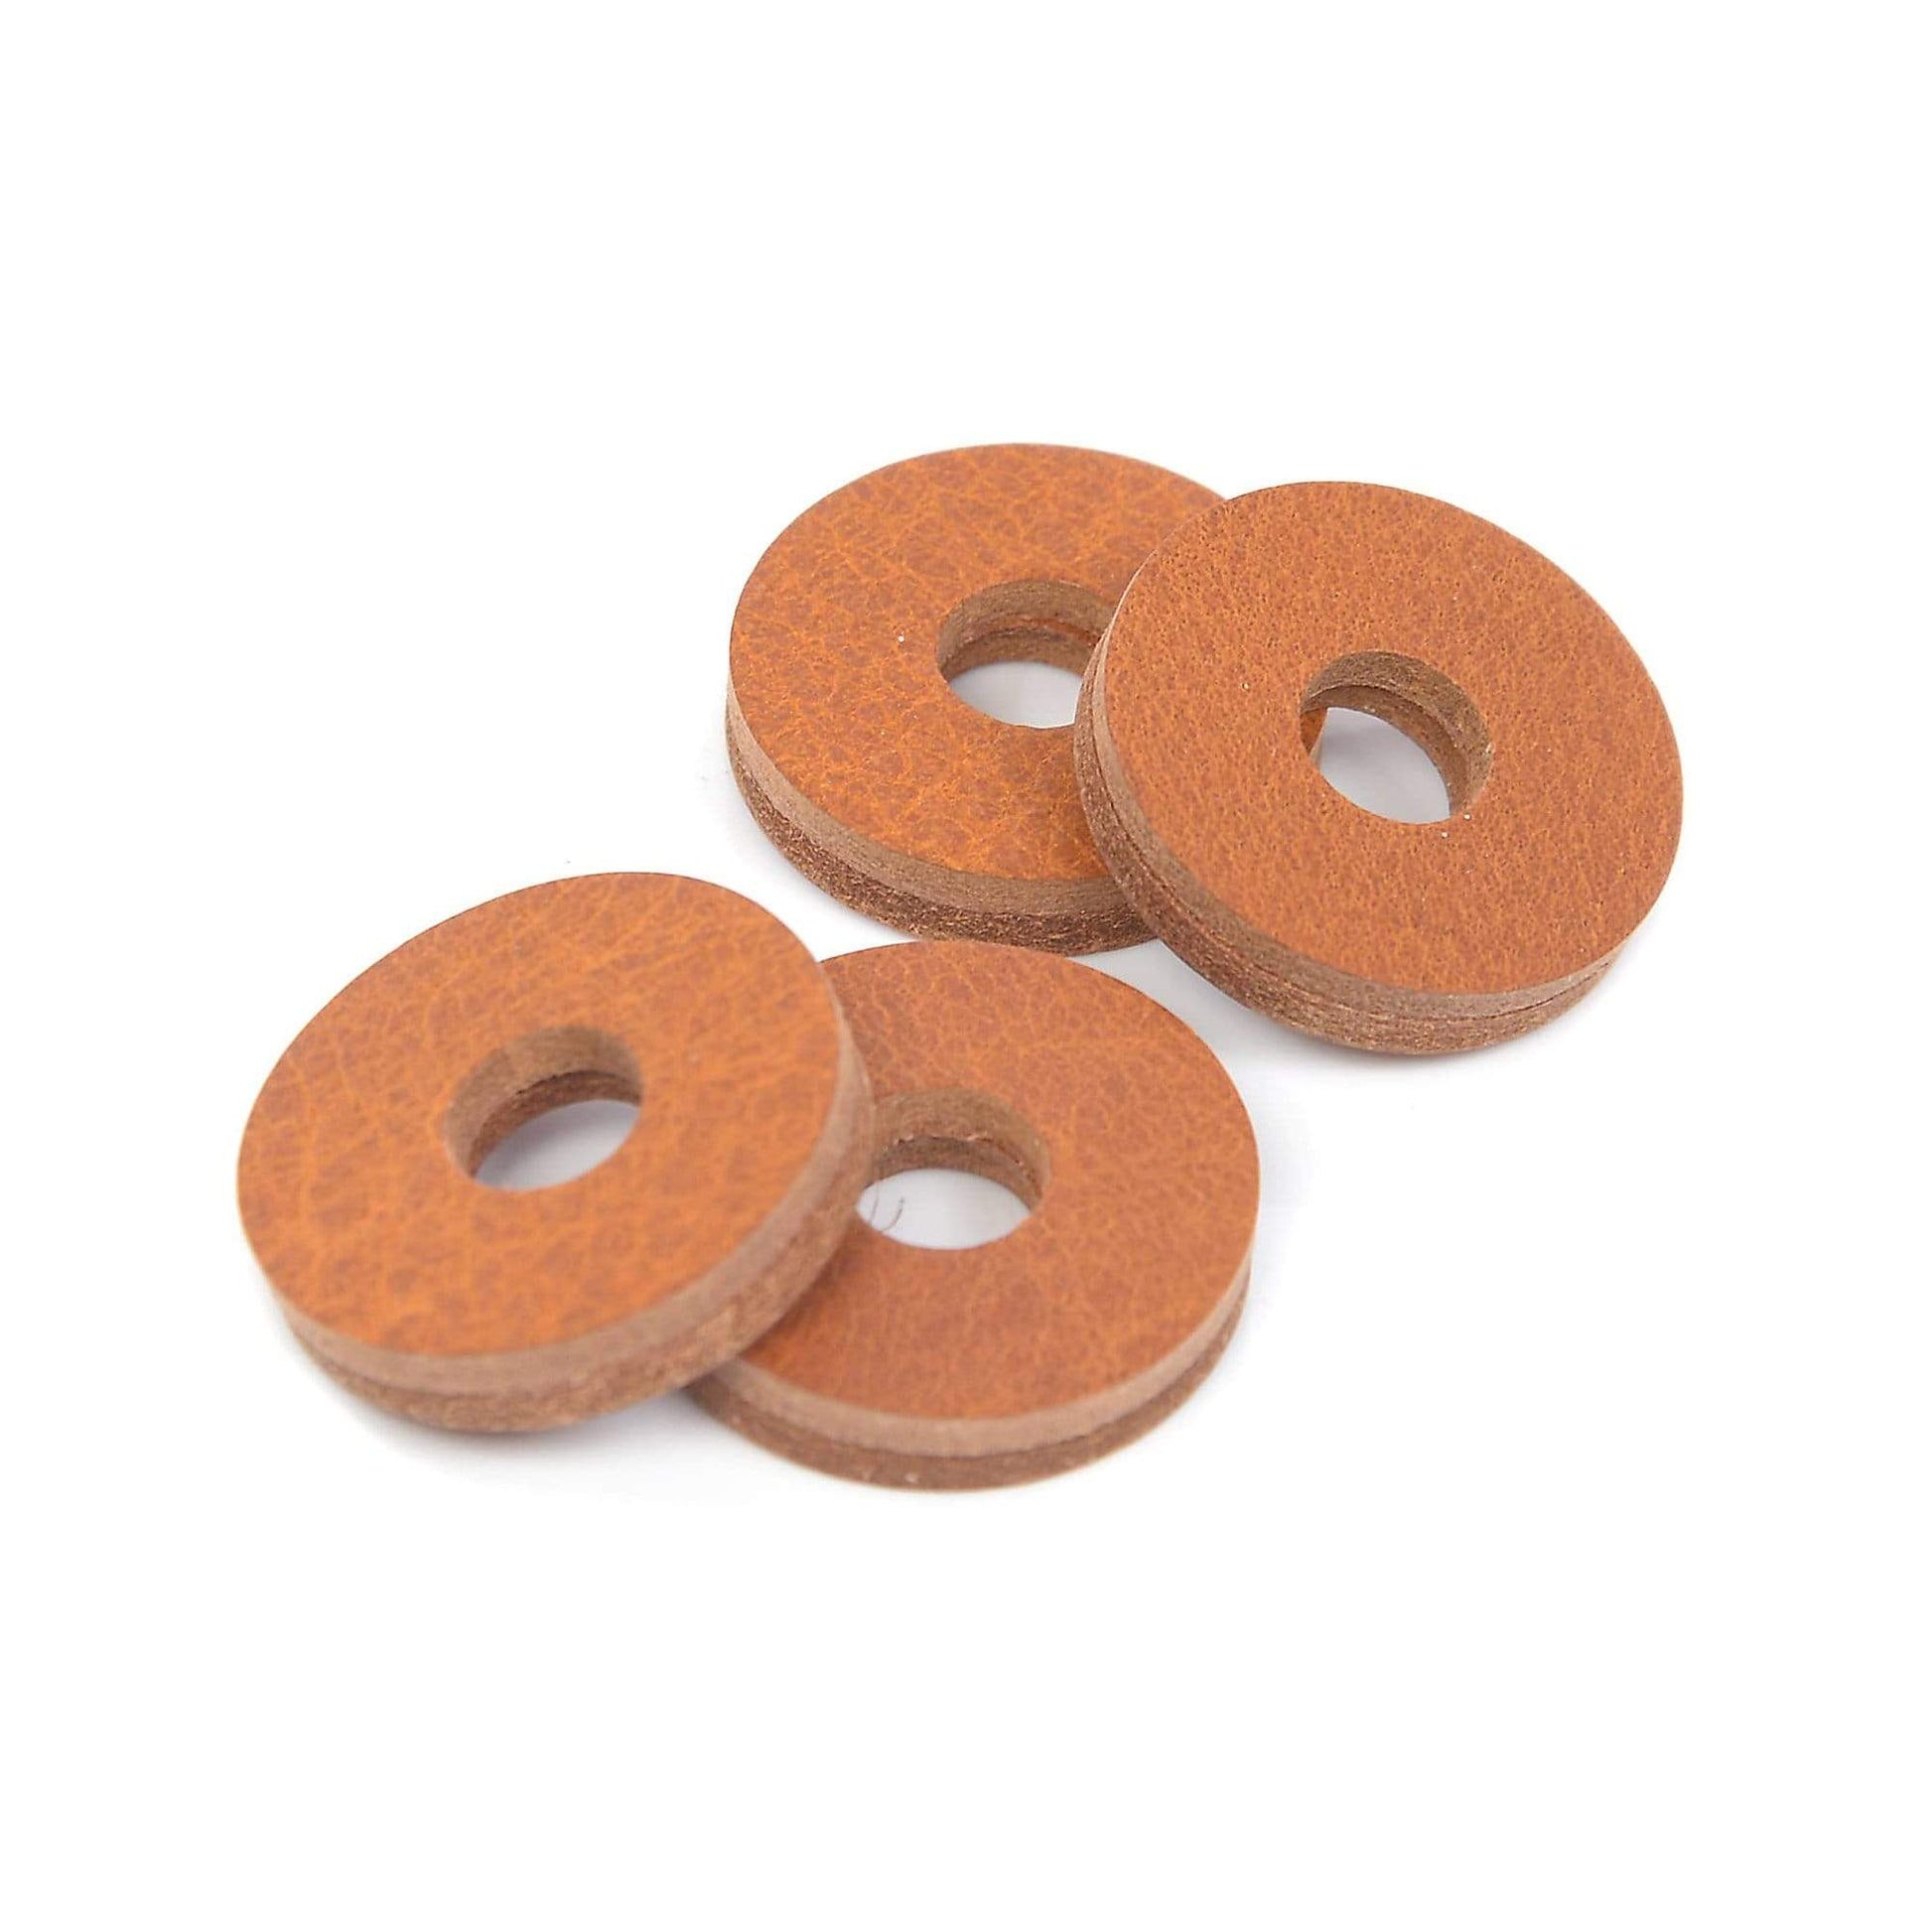 Tackle Leather Cymbal Washers (16 Pack Bundle) Drums and Percussion / Parts and Accessories / Drum Parts